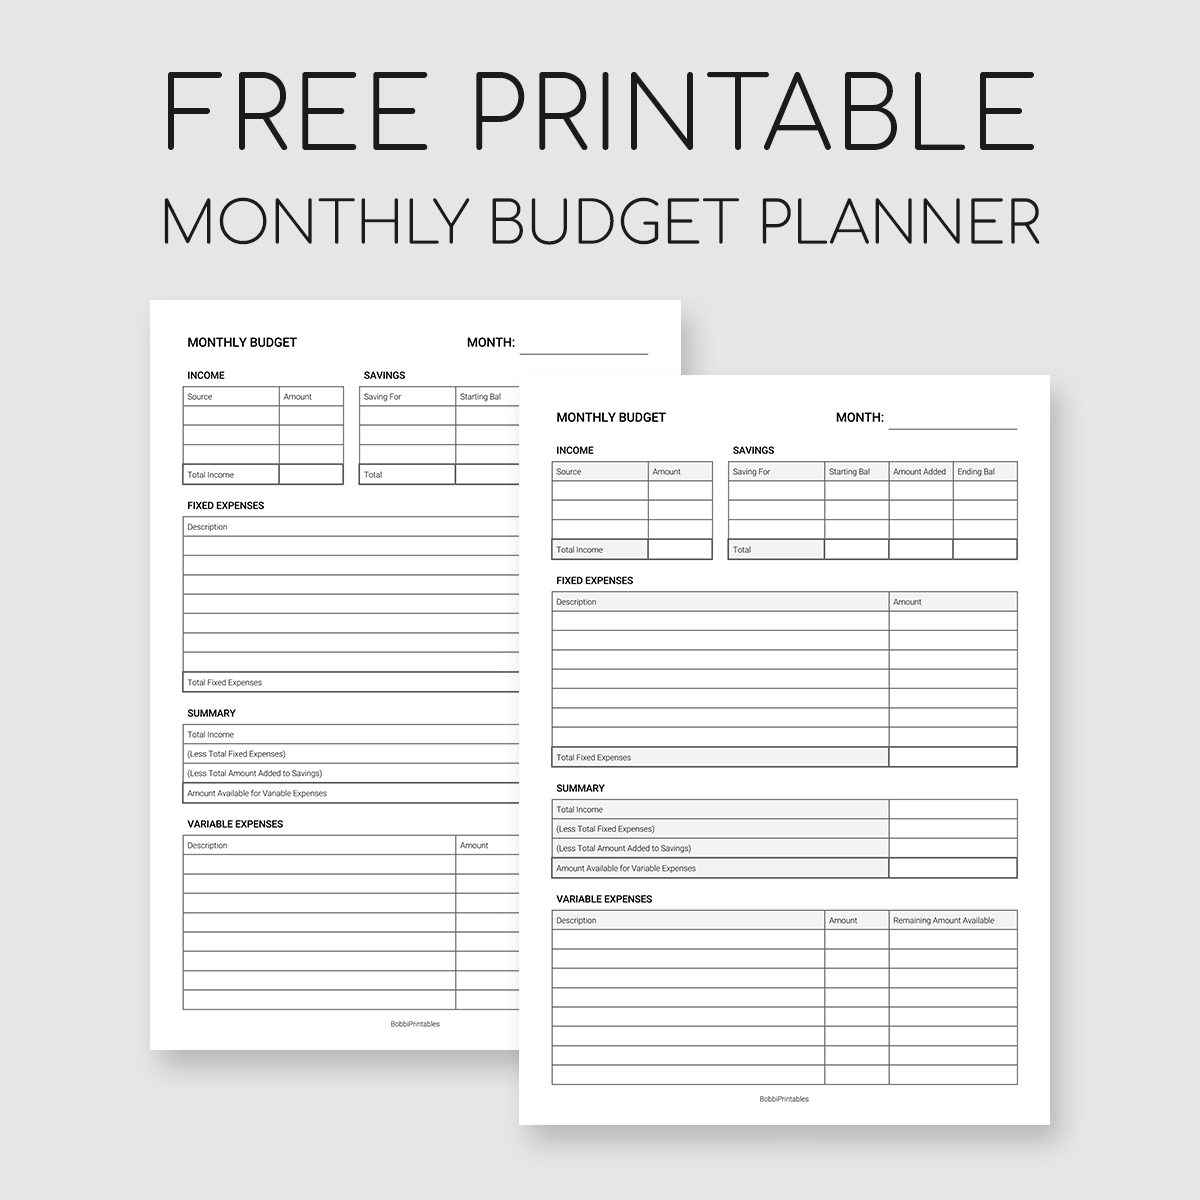 Printable Monthly Budget Planner within Budget Binder Printables 2018 Free